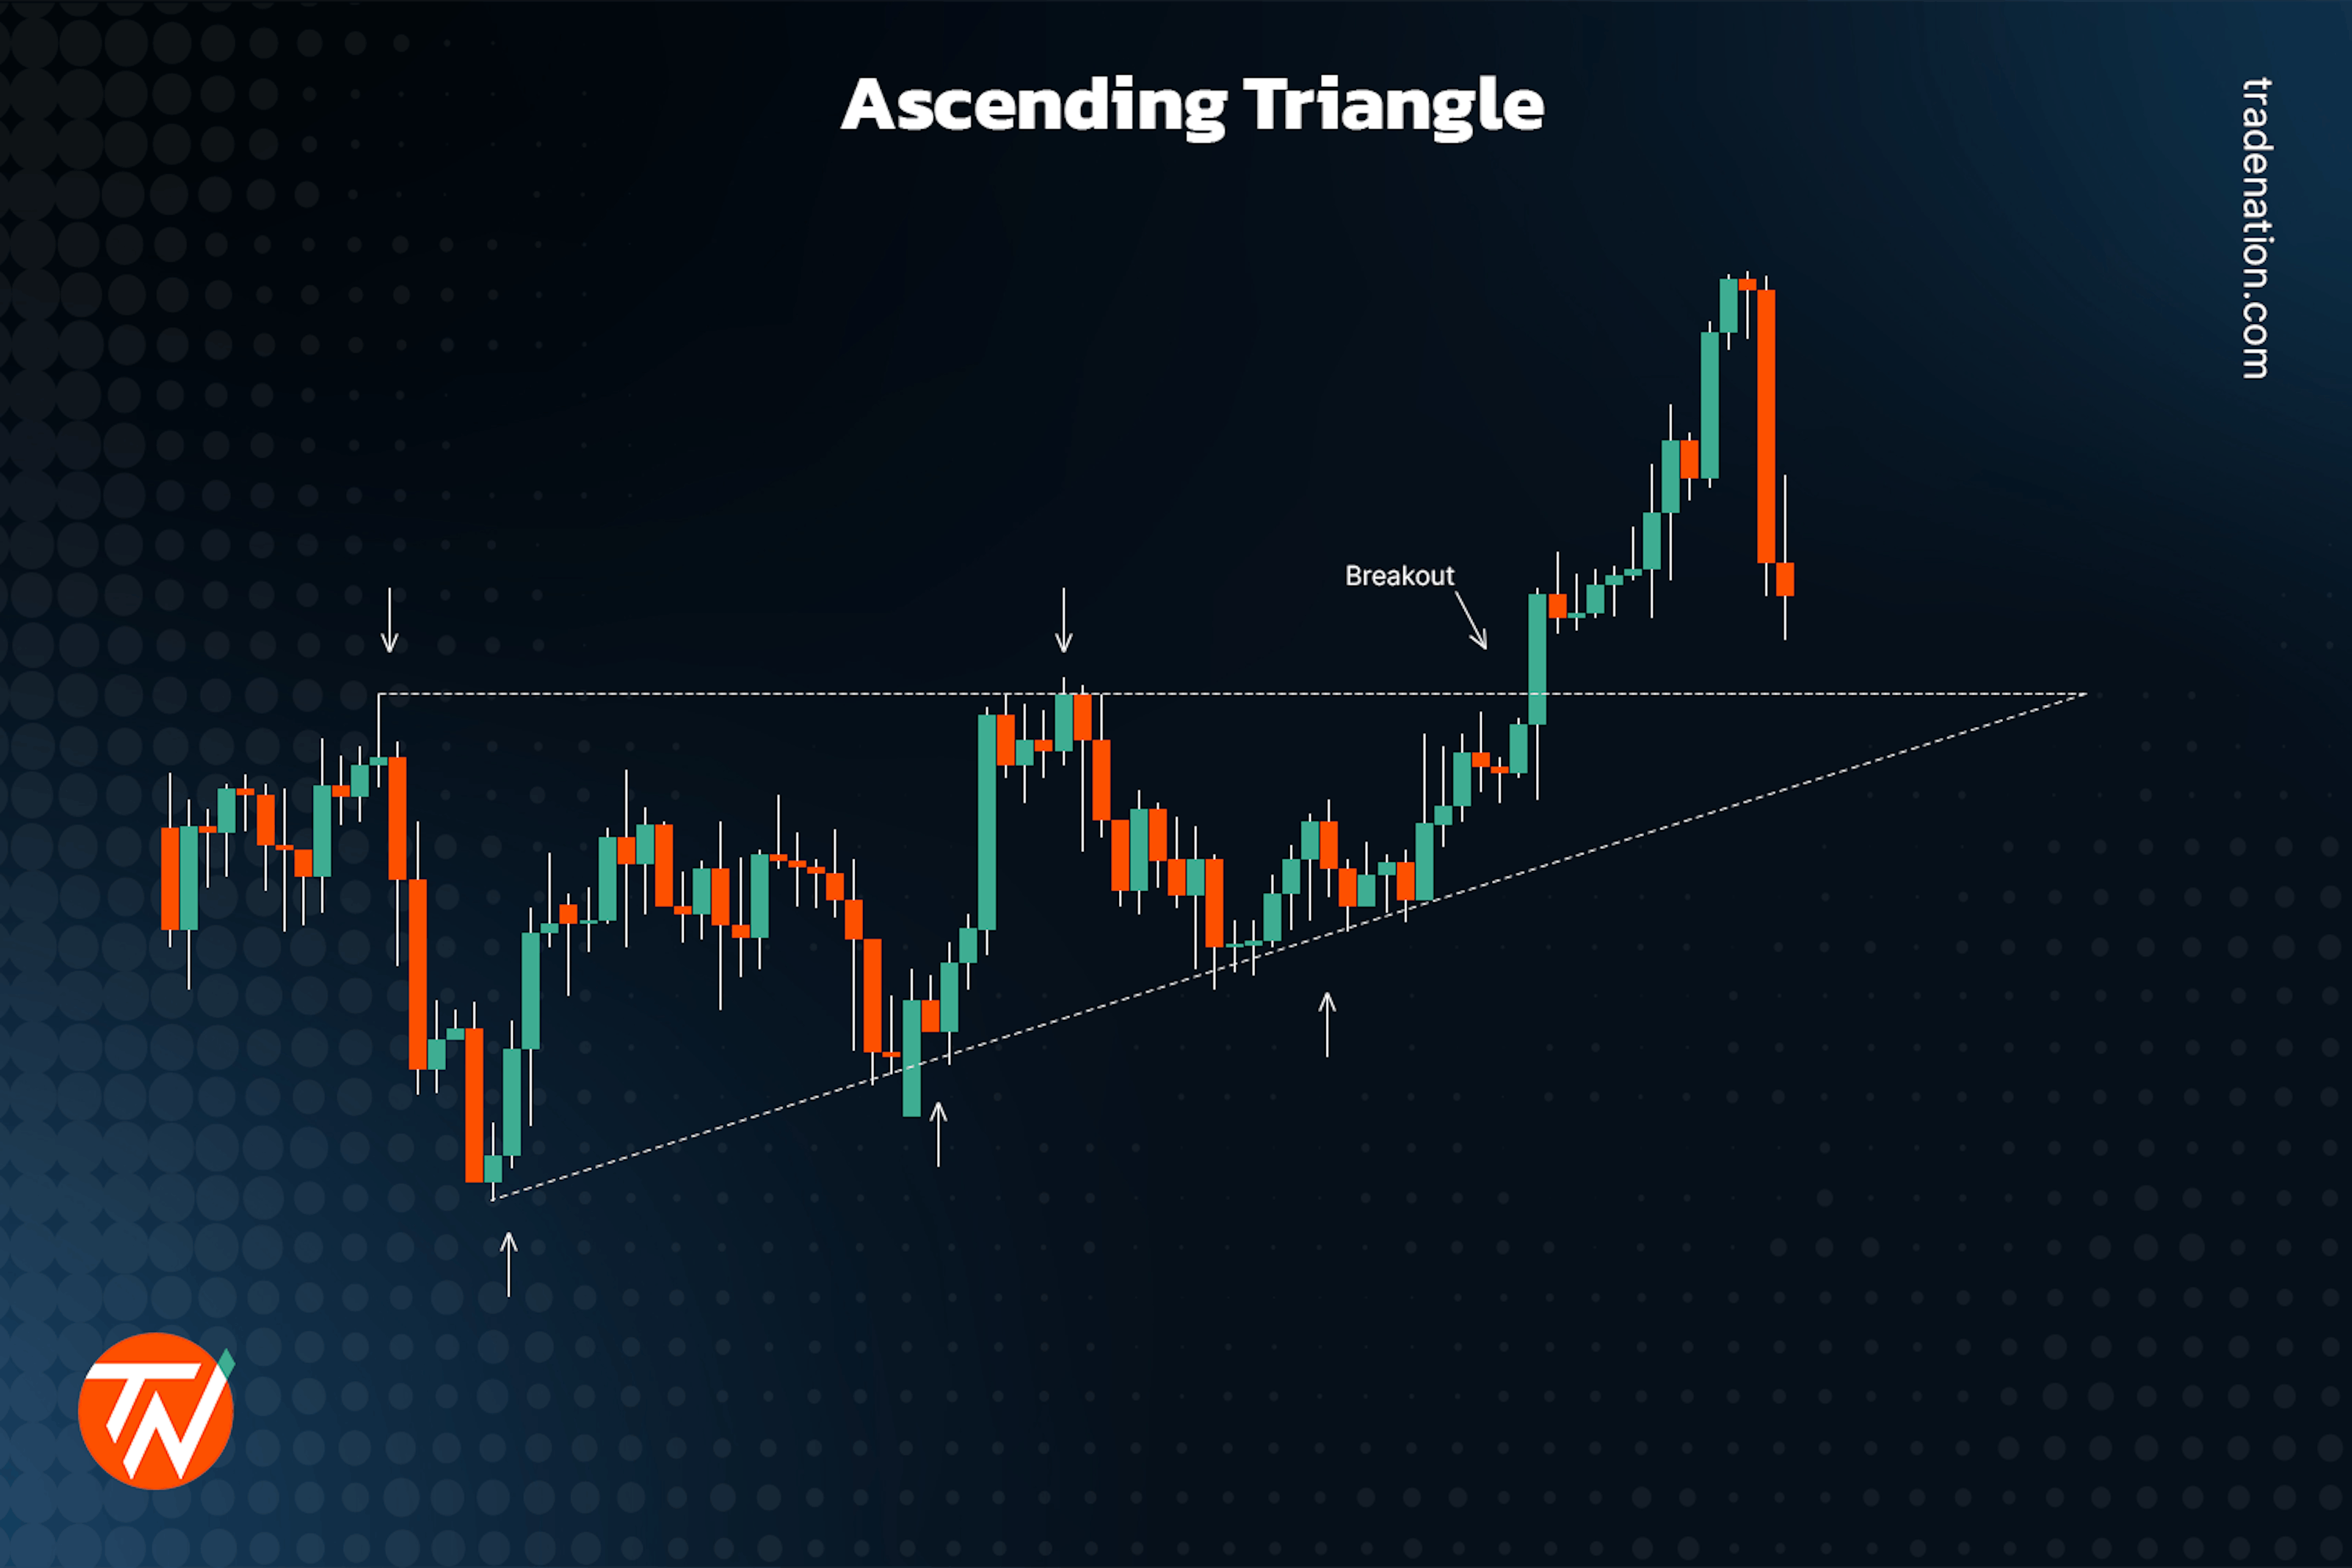 Ascending triangle in trading